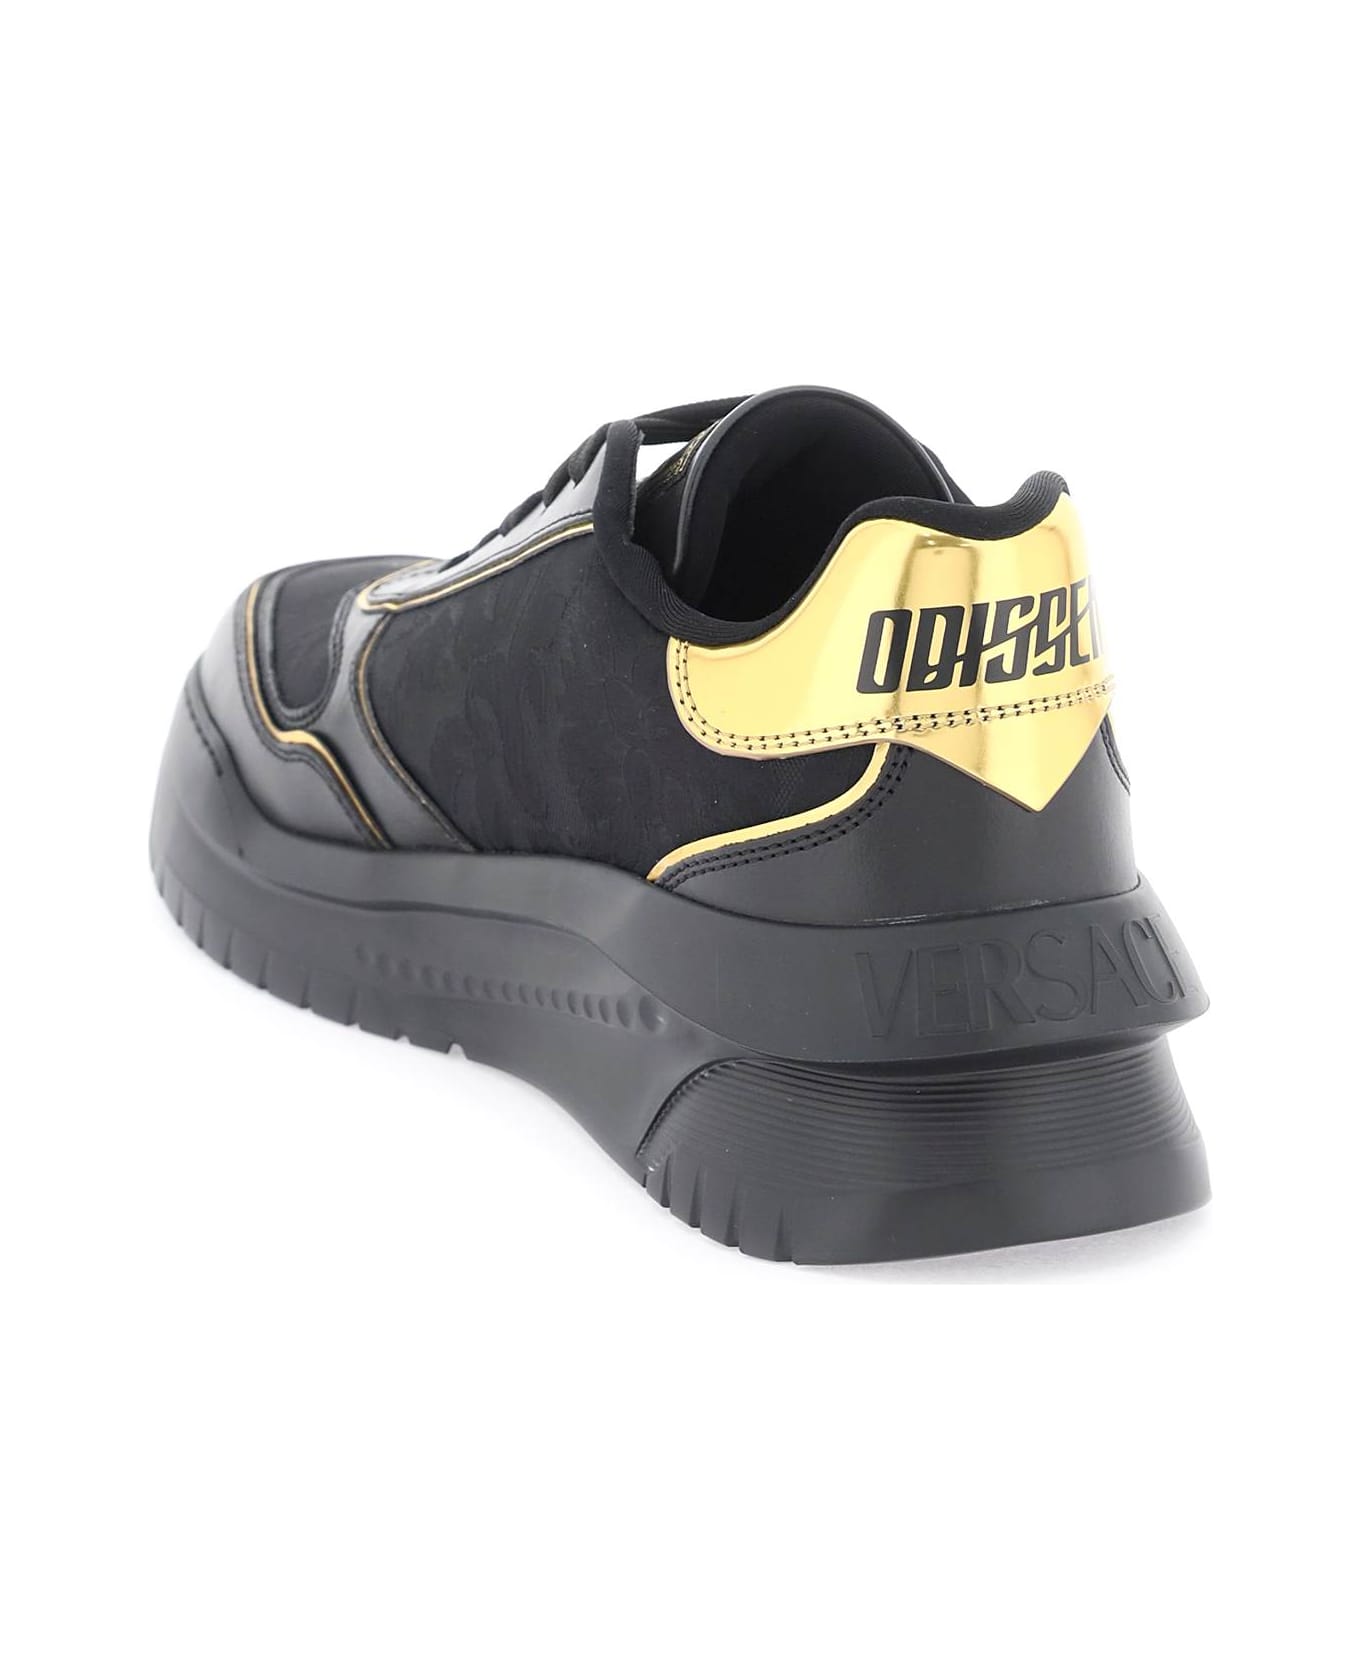 Versace 'odissea' Chunky Leather Sneakers - BLACK GOLD (Black)